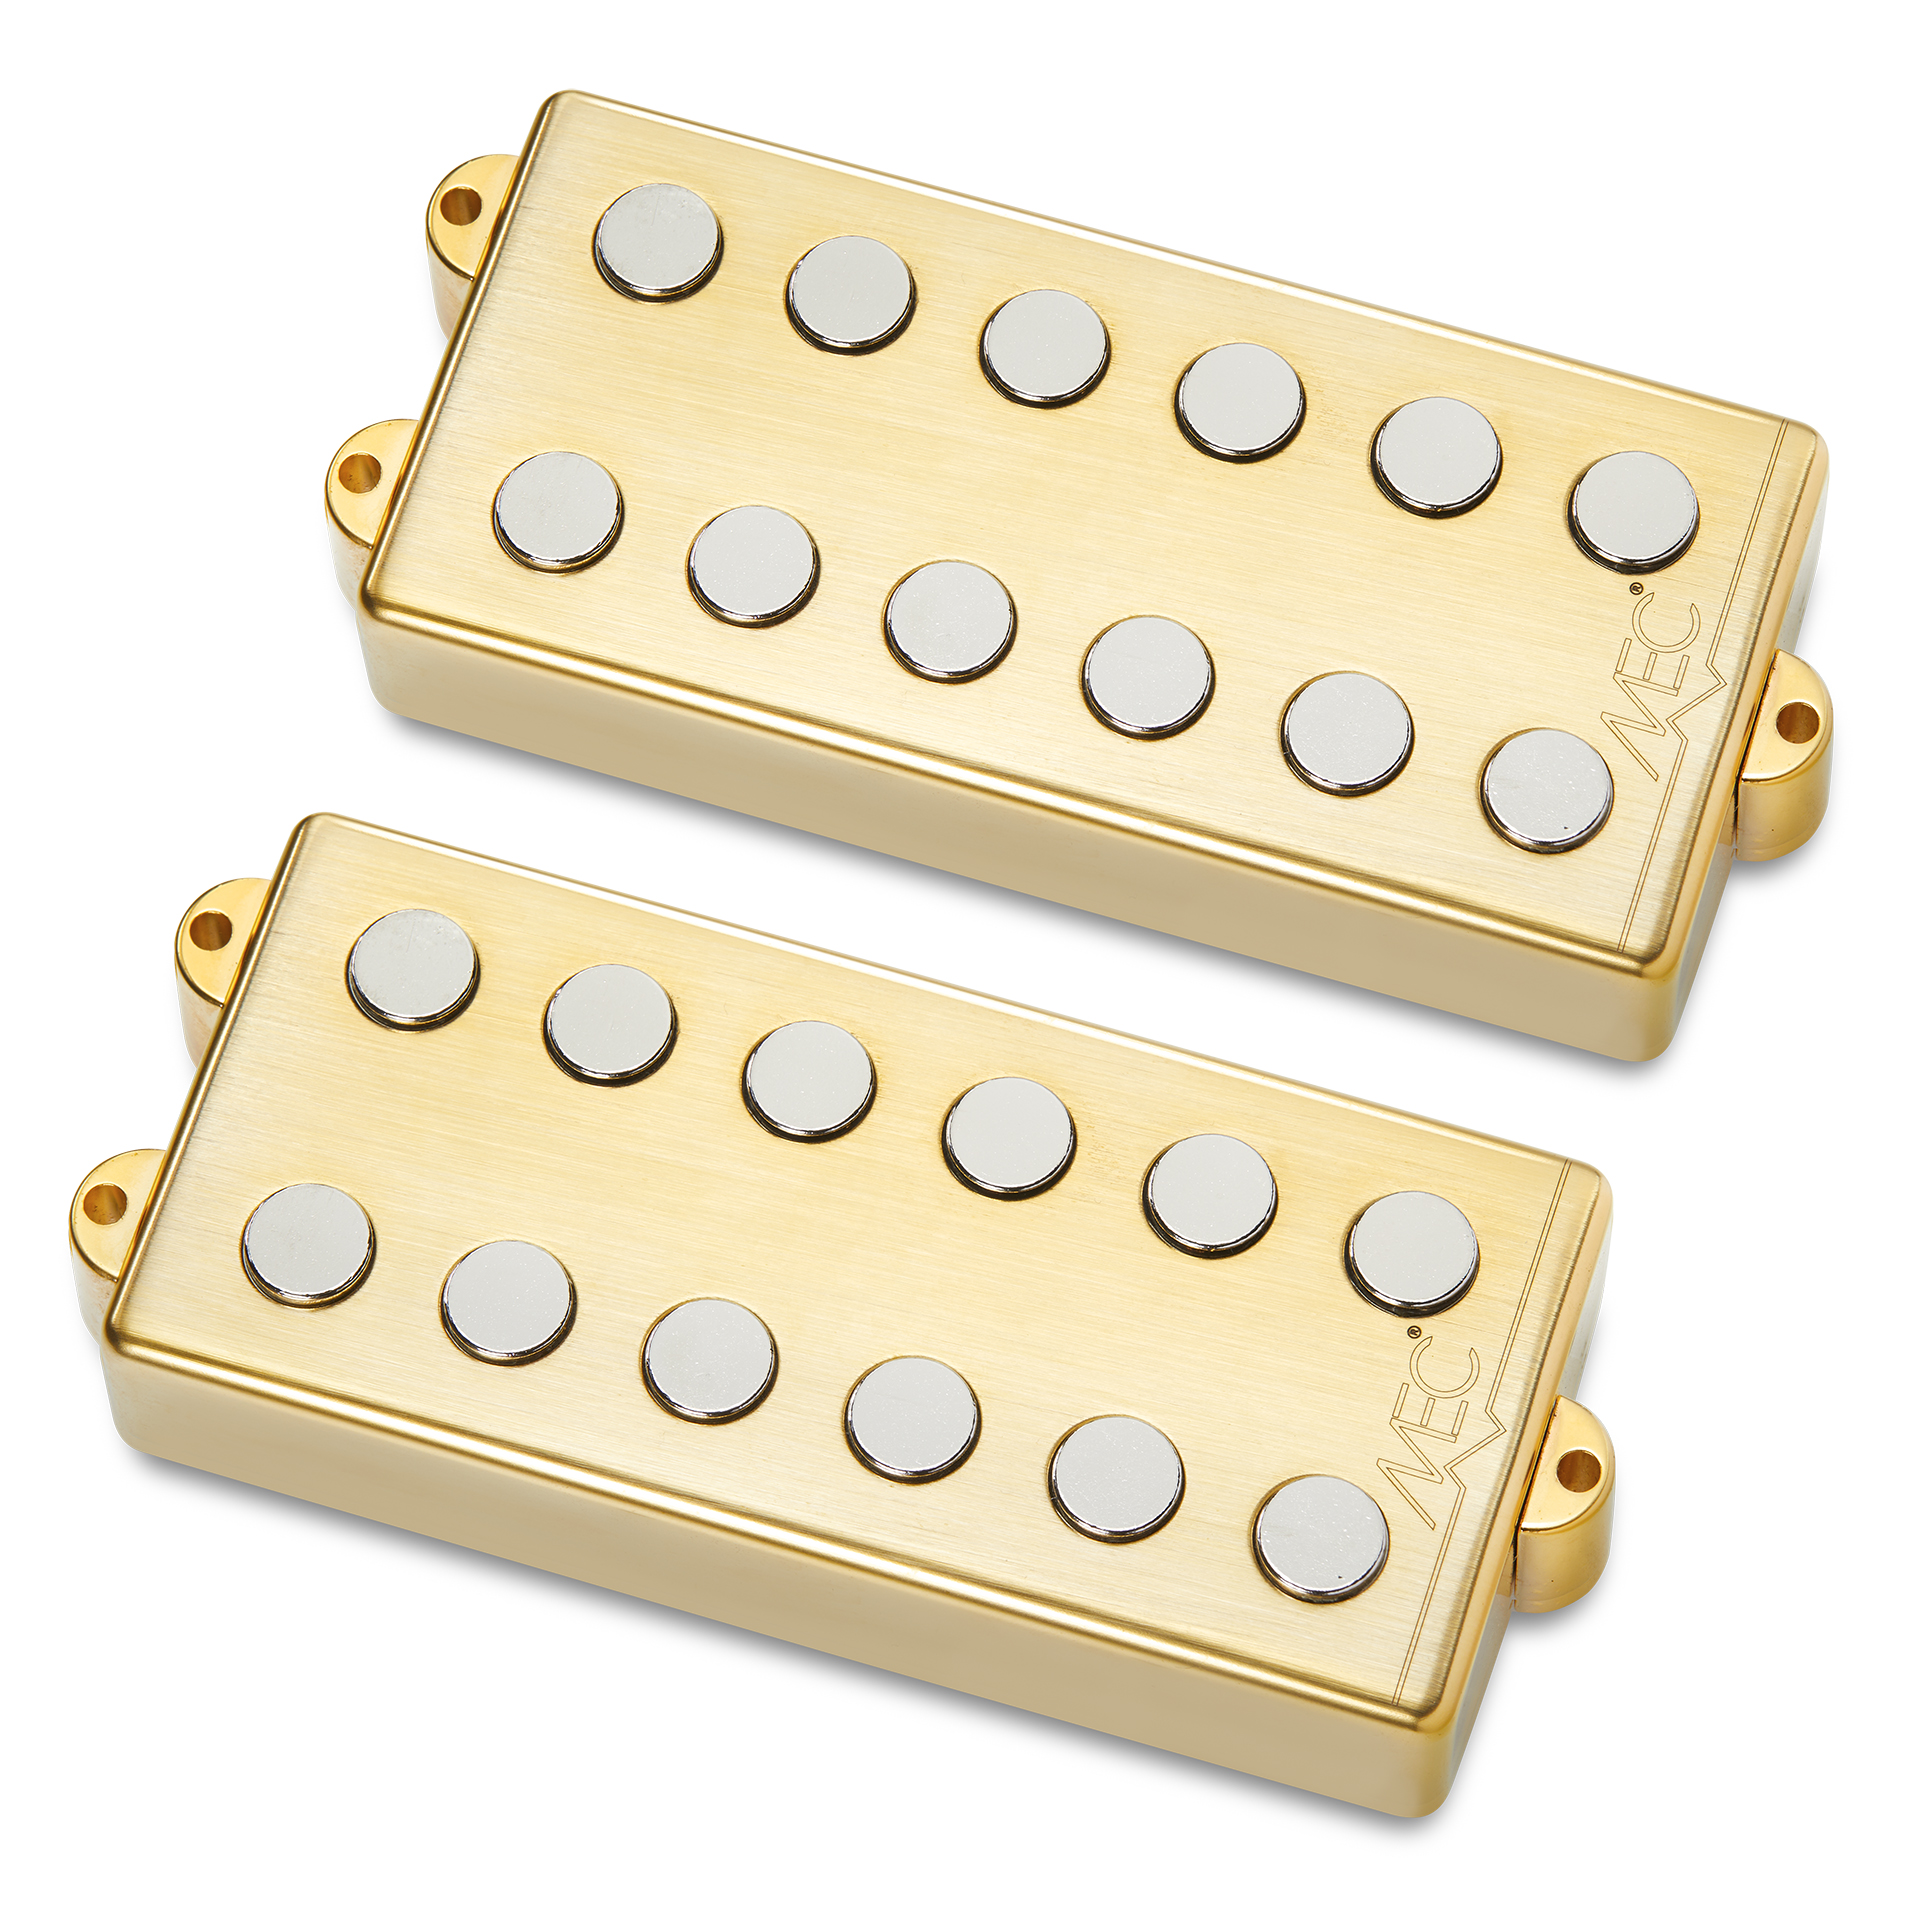 MEC Passive MM-Style Bass Pickup Set, Metal Cover, 6-String - Brushed Gold